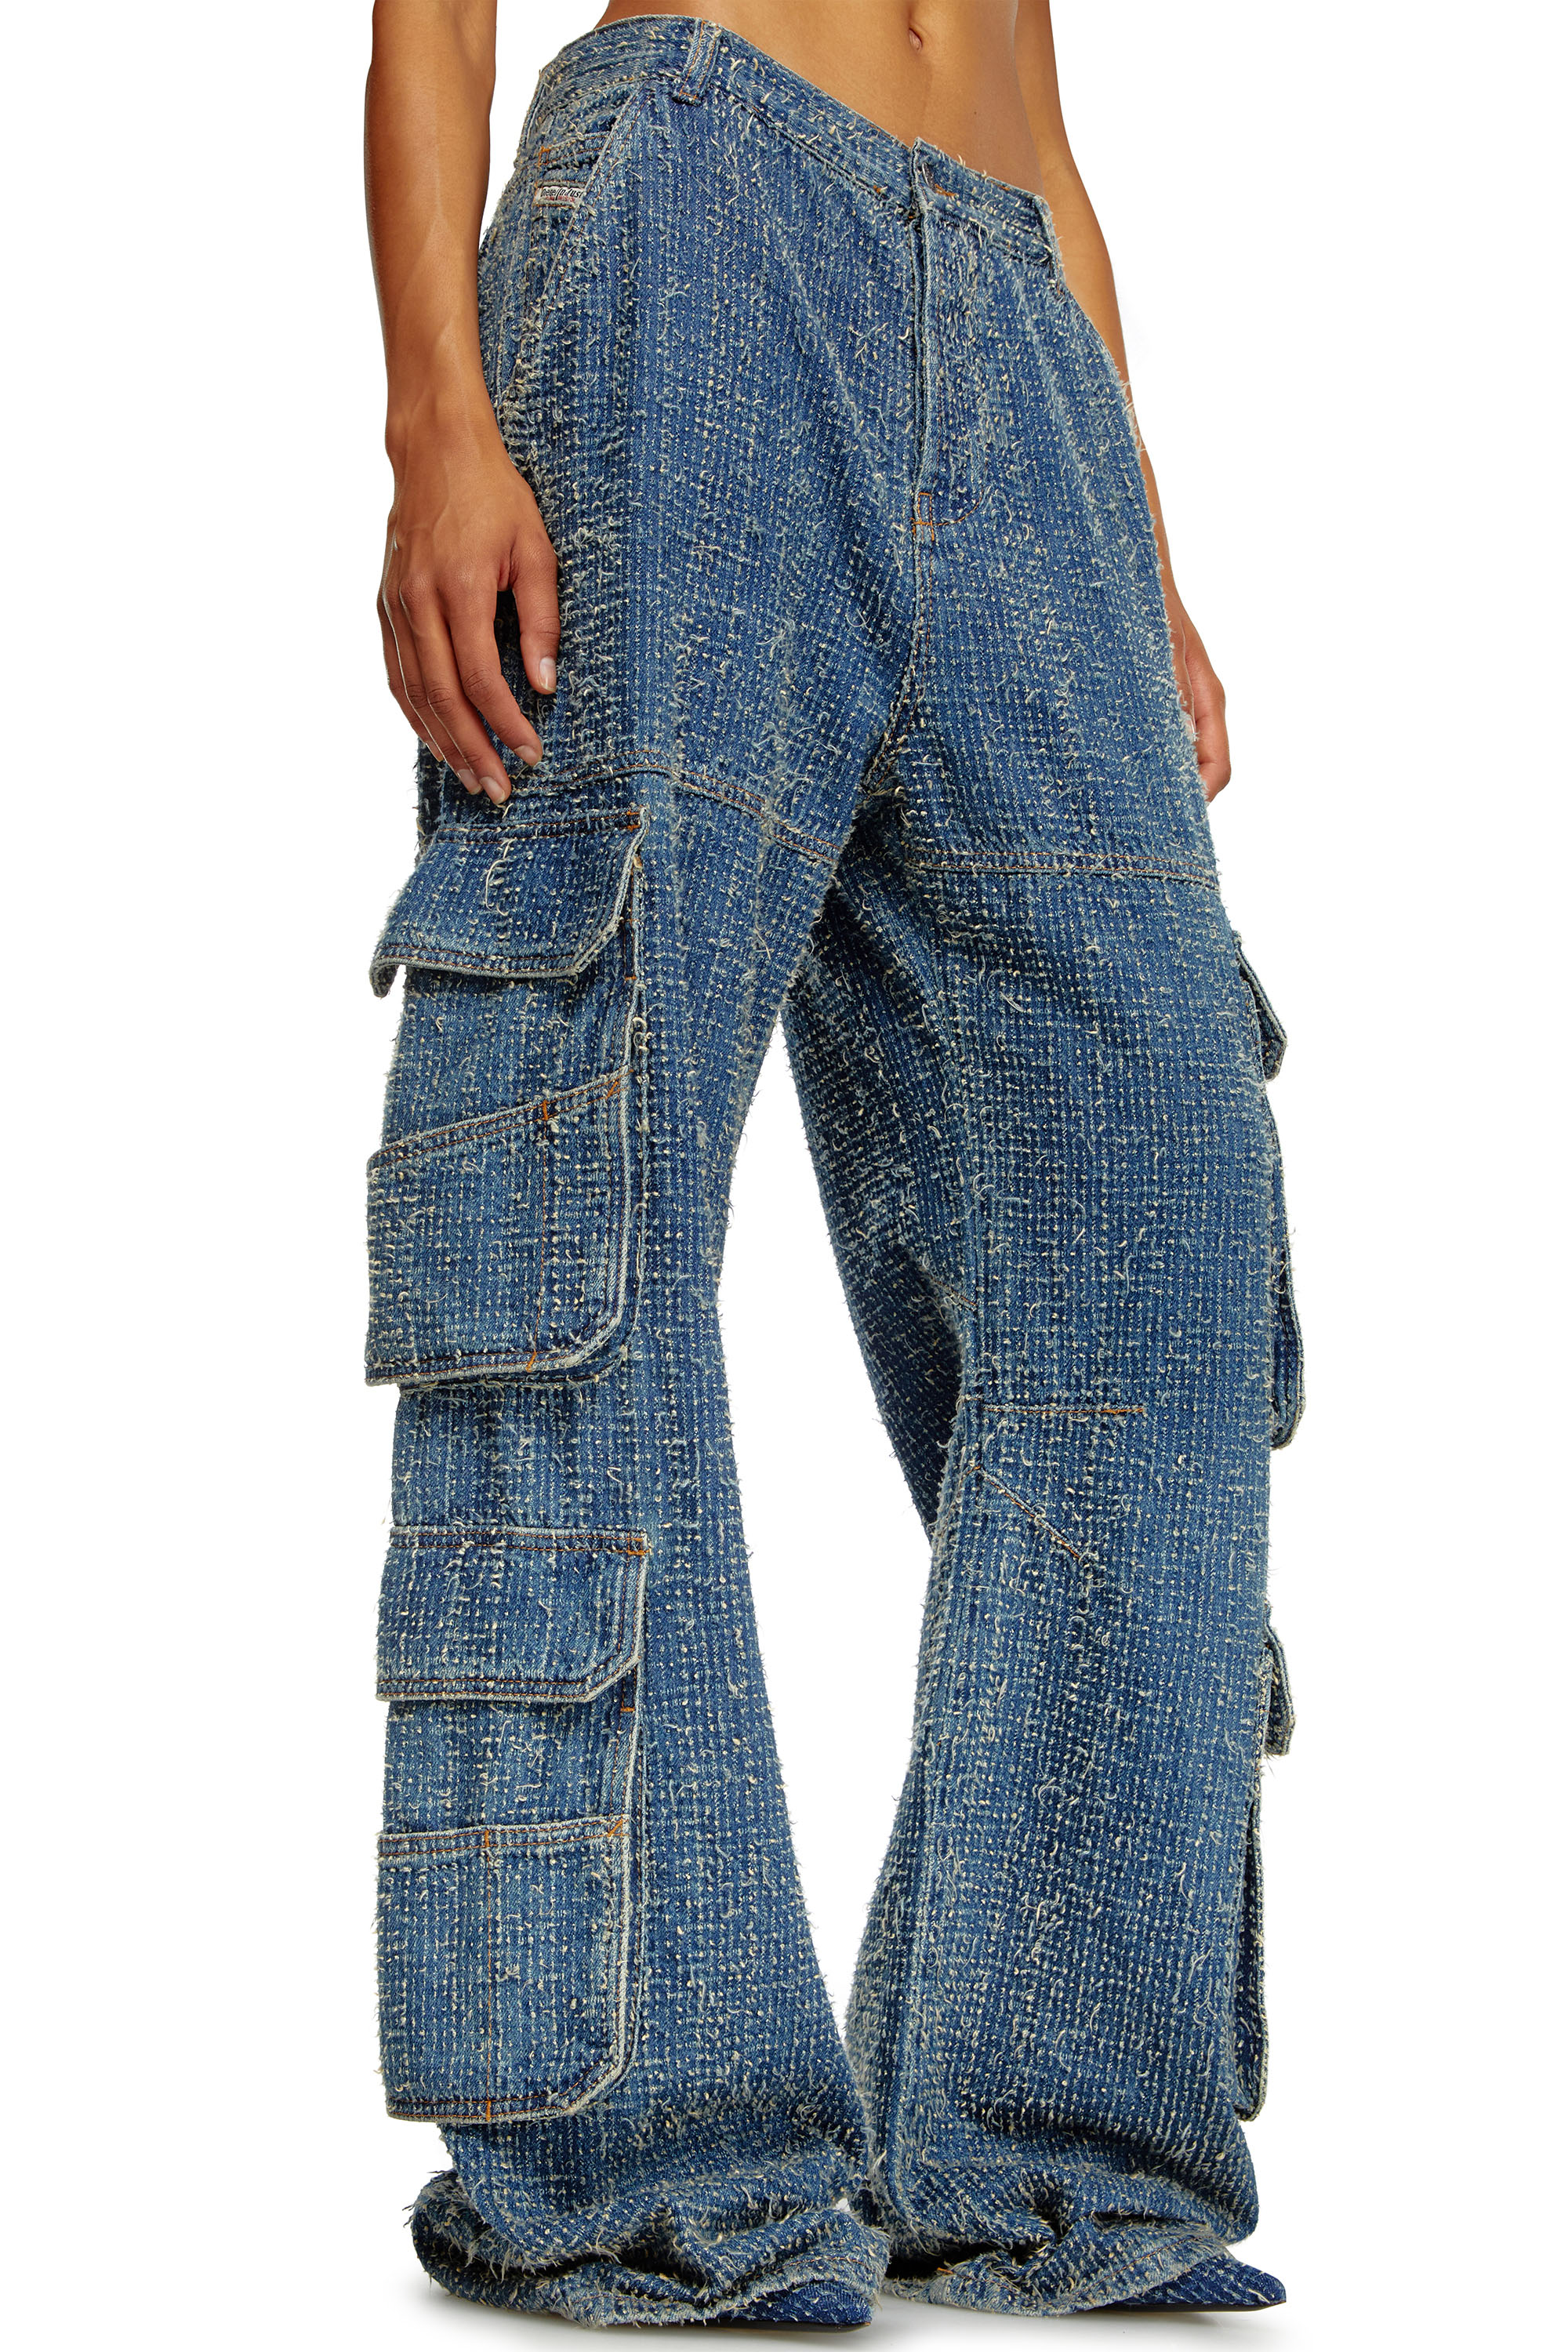 Diesel - Straight Jeans 1996 D-Sire 0PGAH, Mujer Straight Jeans - 1996 D-Sire in Azul marino - Image 4